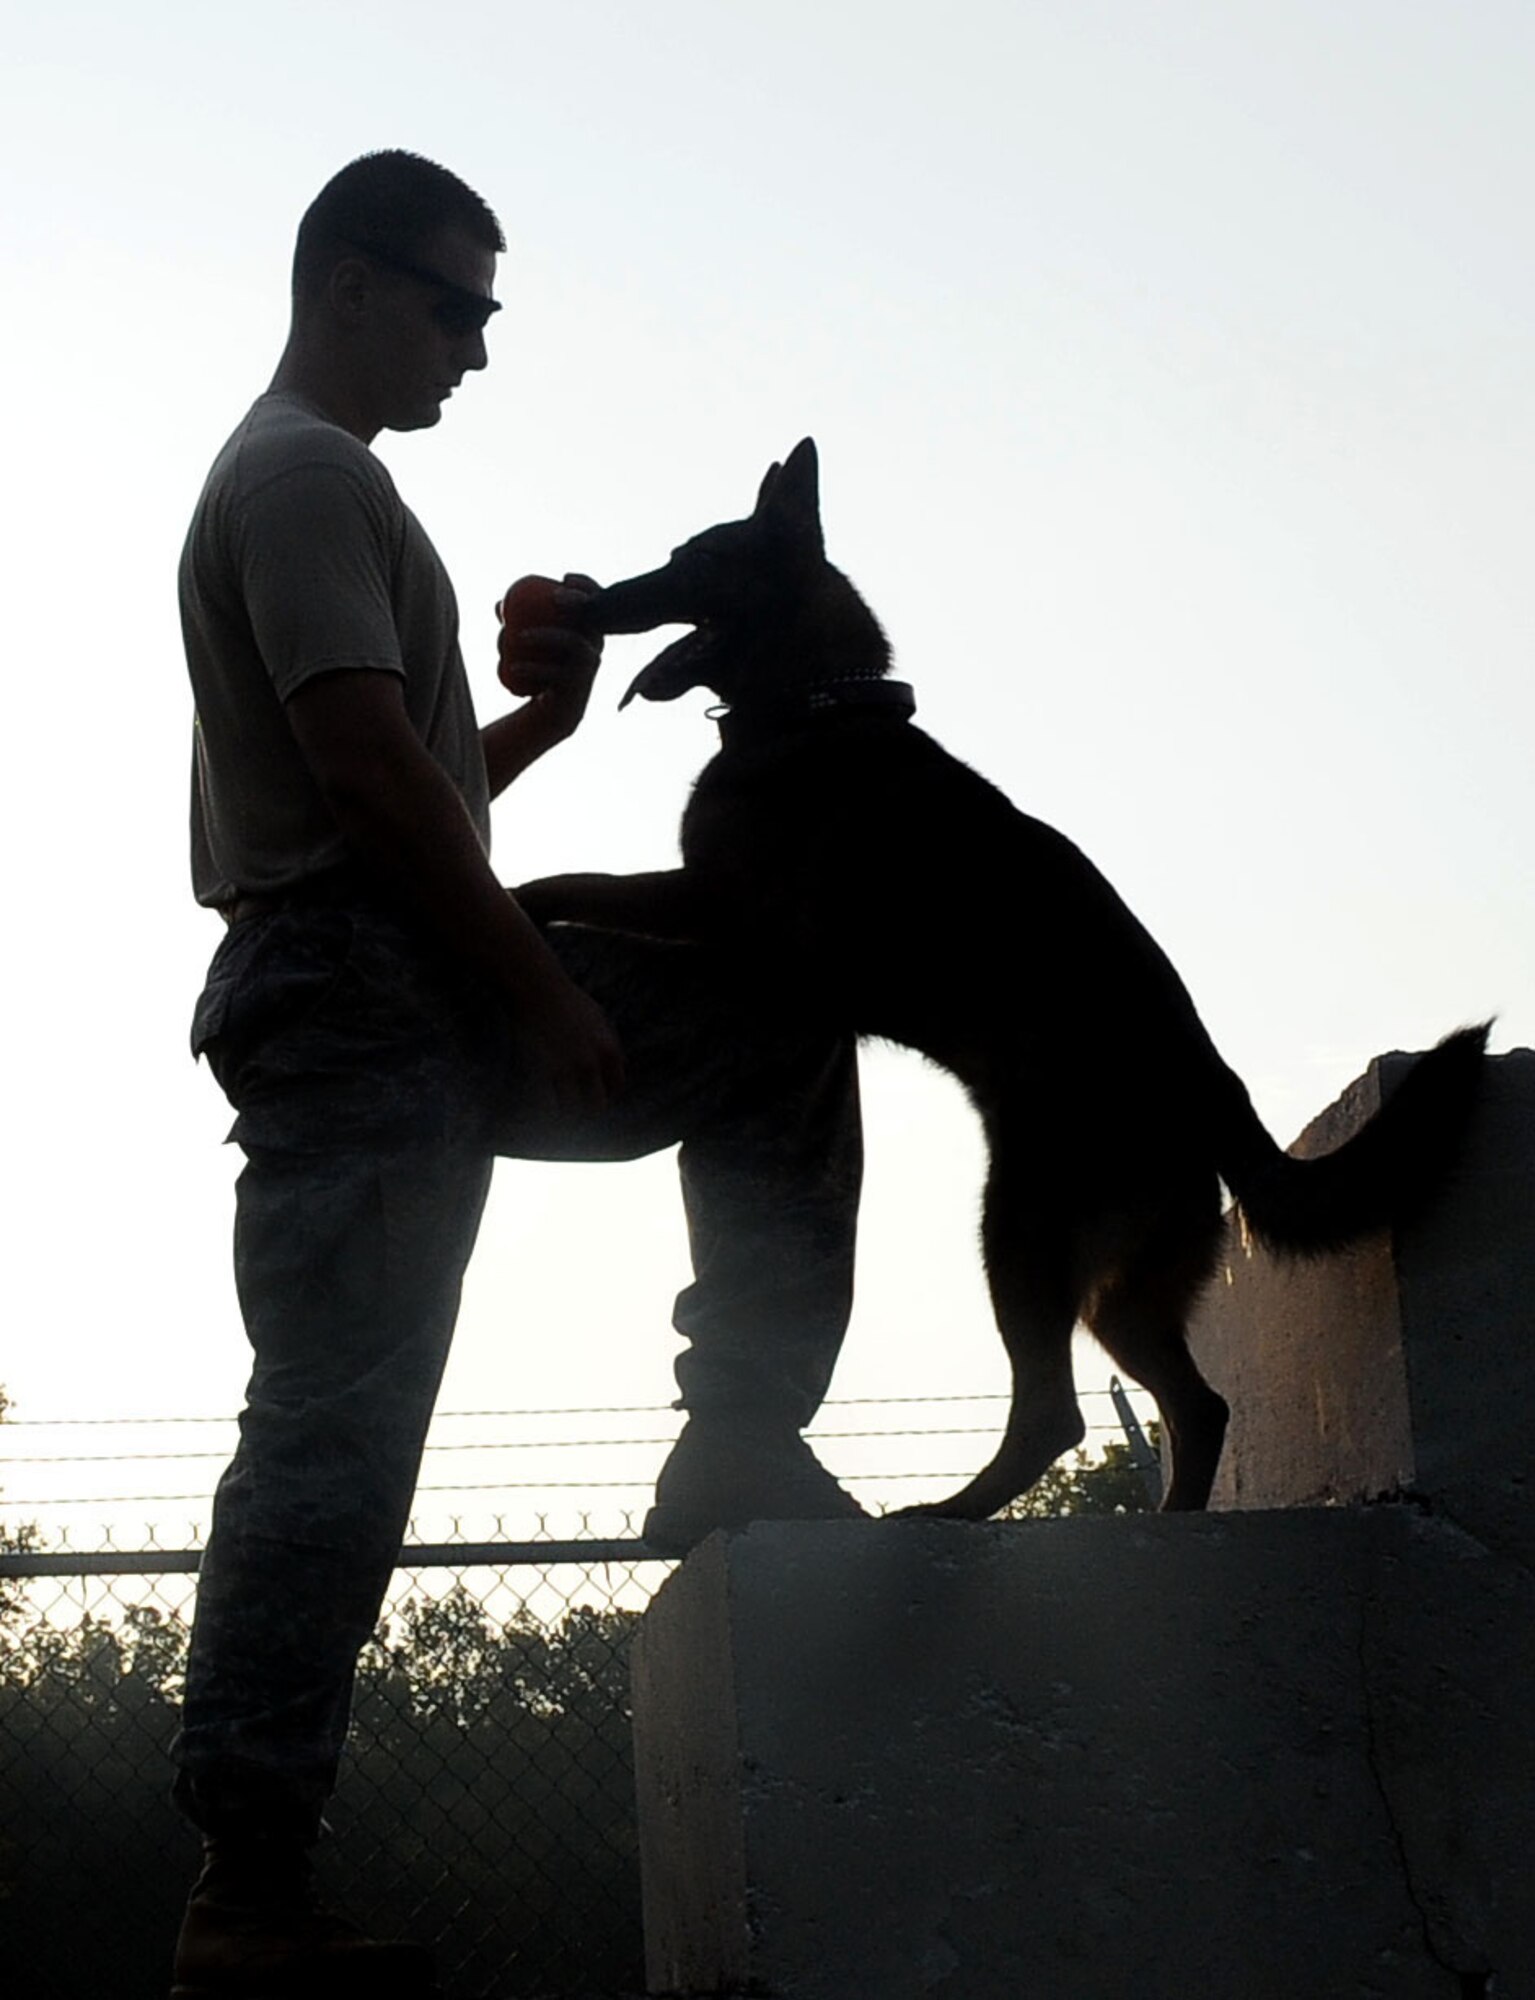 Senior Airman Andrew Phillips, 2nd Security Forces Squadron Military Working Dog handler, takes a moment in the early morning to play with his canine, Rico, on Barksdale Air Force Base, La., Aug. 24. Phillips and Rico are preparing for a deployment and generally train together in the early morning to beat the heat of Barksdale's summer months. (U.S. Air Force photo/Senior Airman Amber Ashcraft) (RELEASED)